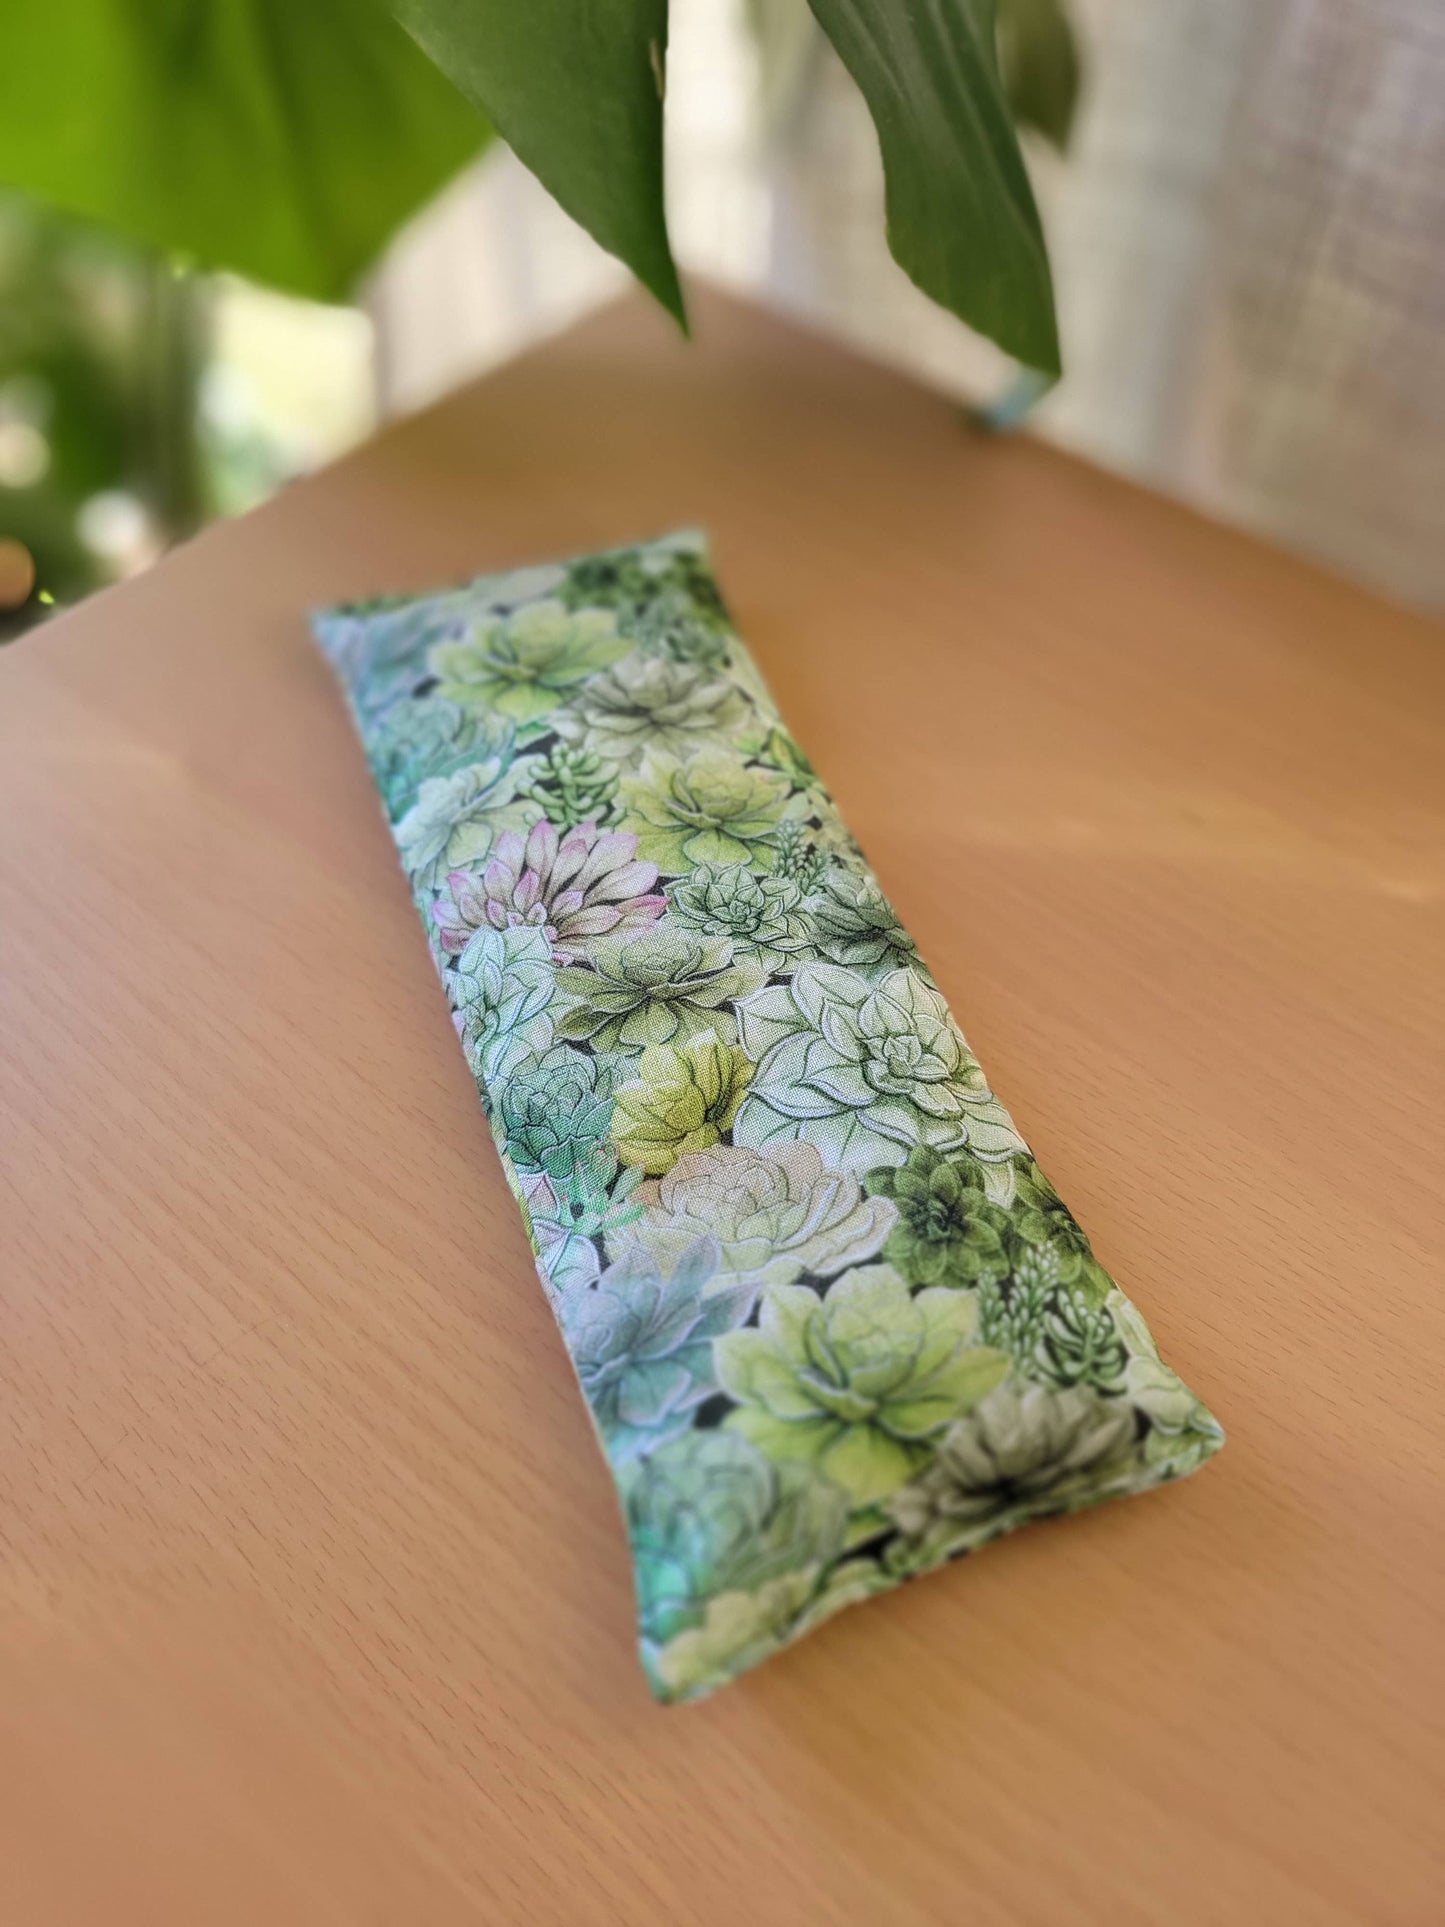 Aromatherapy Hot/Cold Weighted Eye Pillow - Soothing Pattern: Lavender and Peppermint / Rice and Flaxseed Mix / Boho Wildflowers